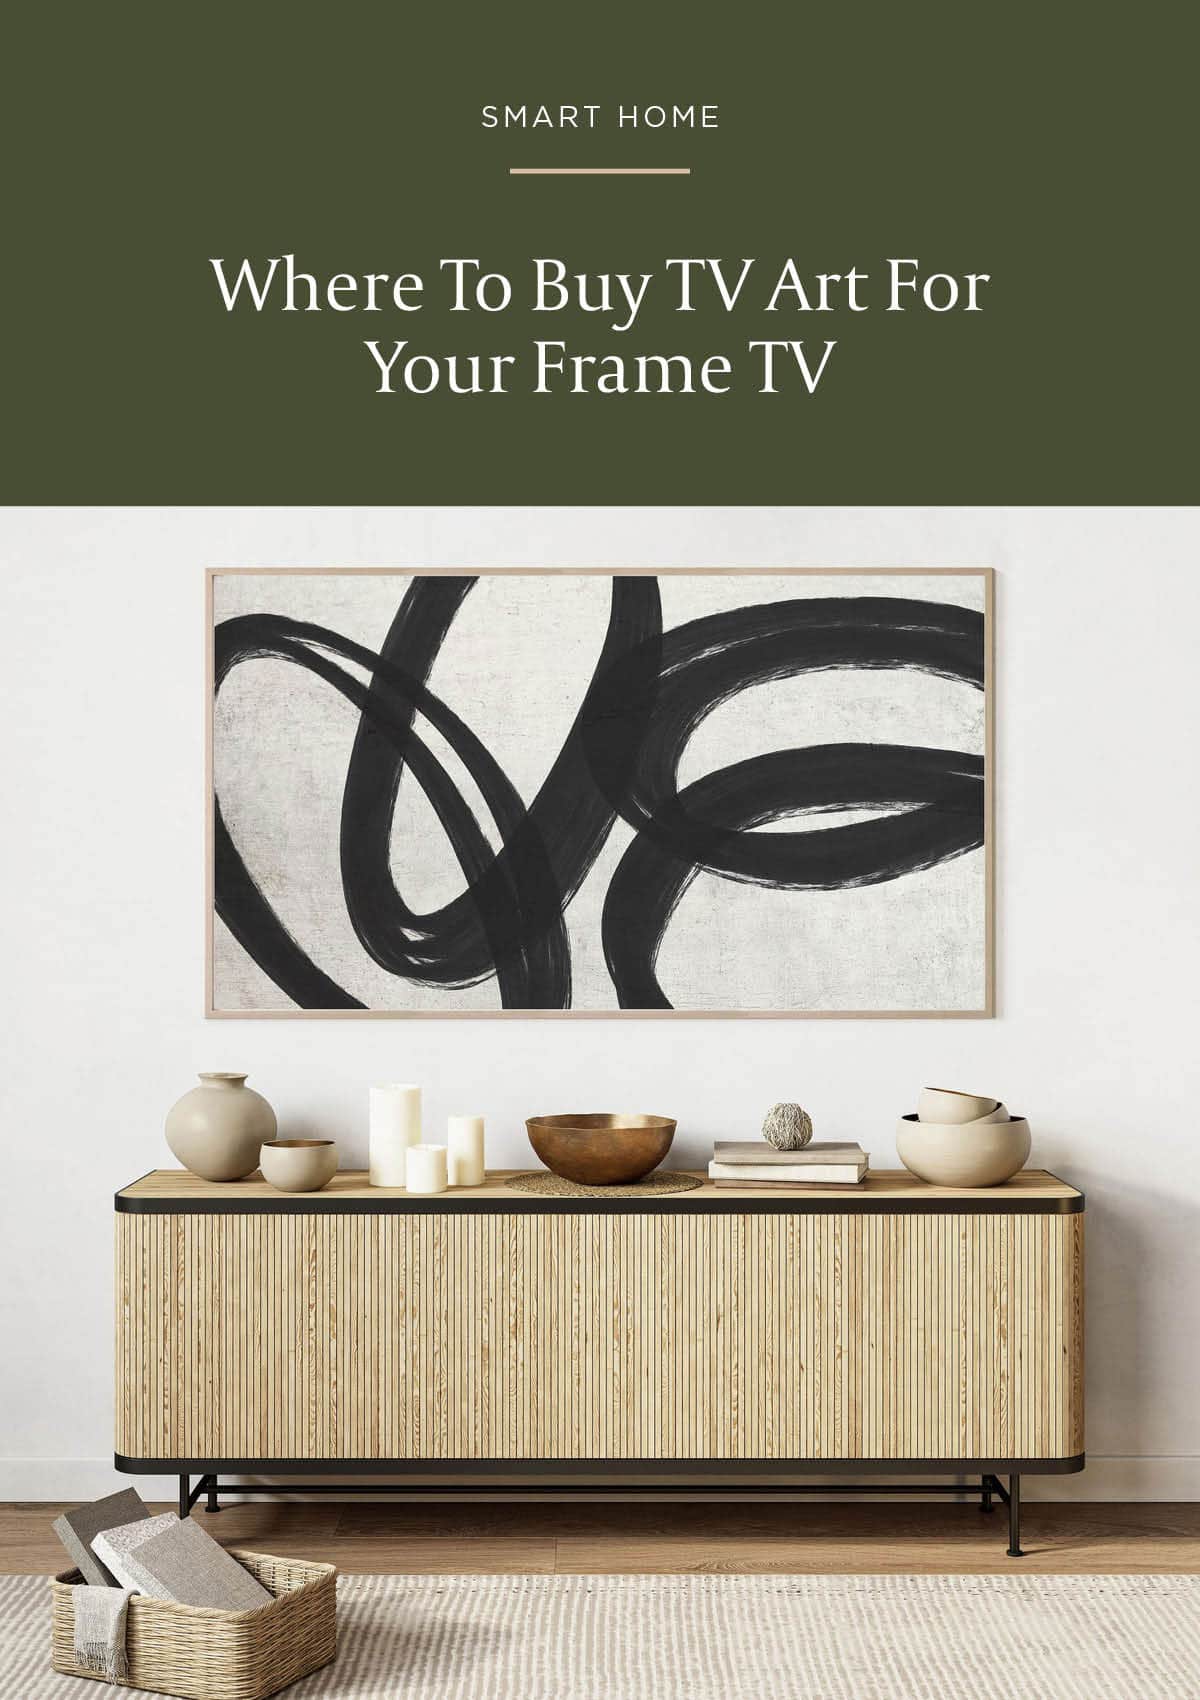 Abstract Black and White TV Art You Can Upload To The Samsung Frame TV - Did you know you can buy and download digital tv art for the Samsung Frame TV. Most are under $2. So affordable!